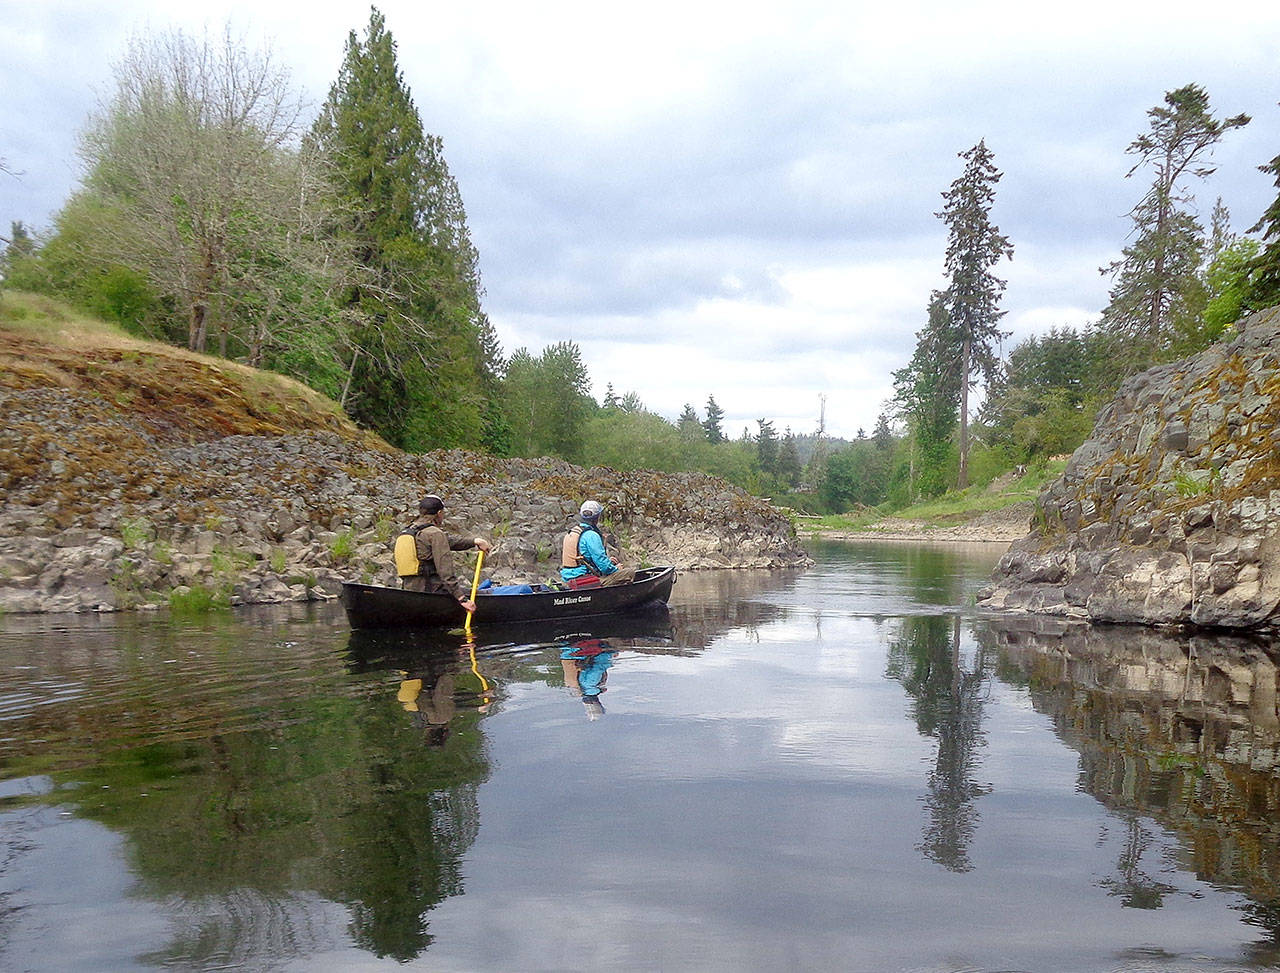 Clean water activist to present Chehalis River canoe trip